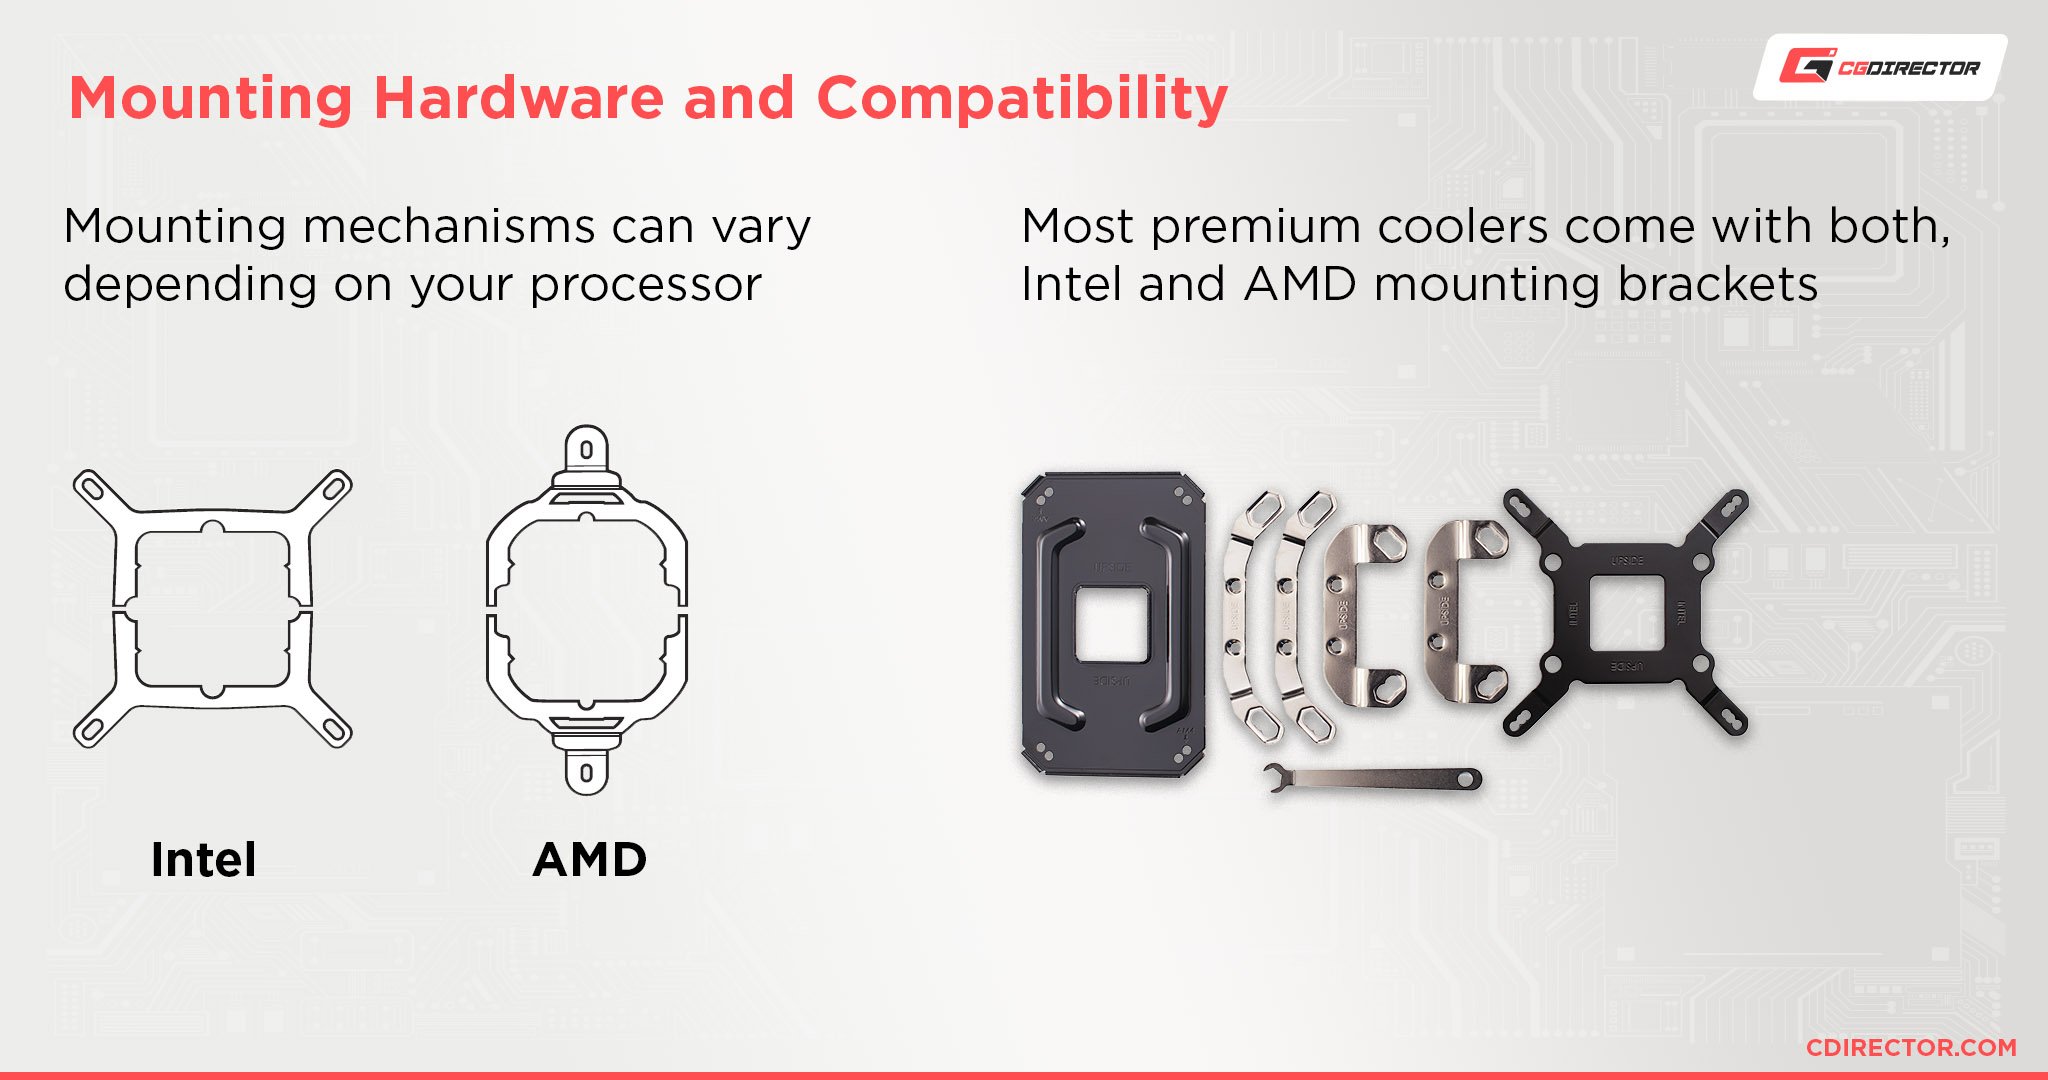 Mounting Hardware and Compatibility